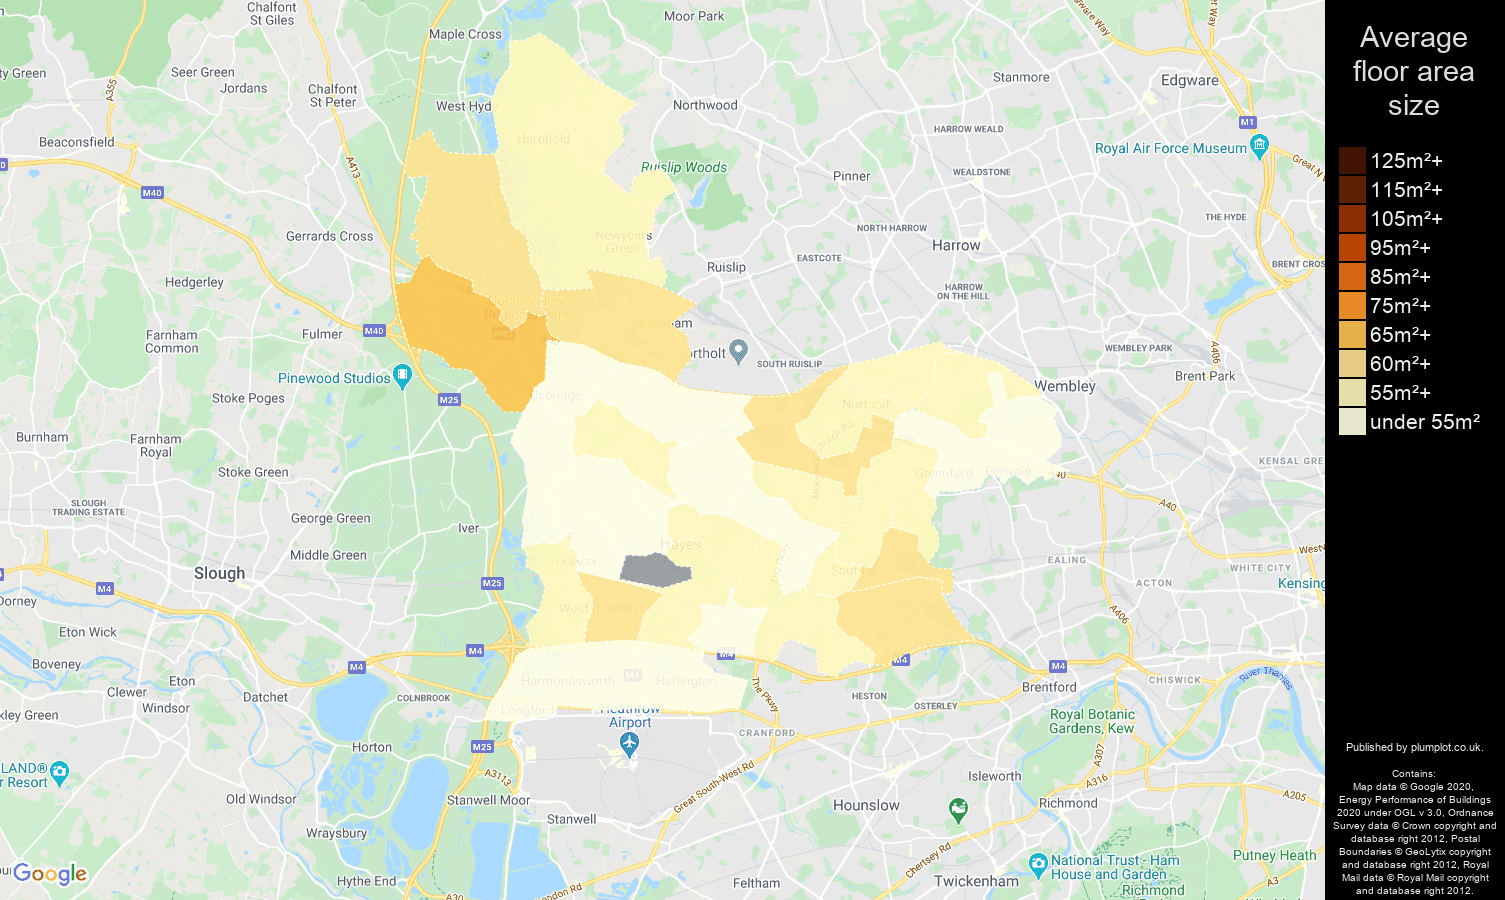 Southall map of average floor area size of flats